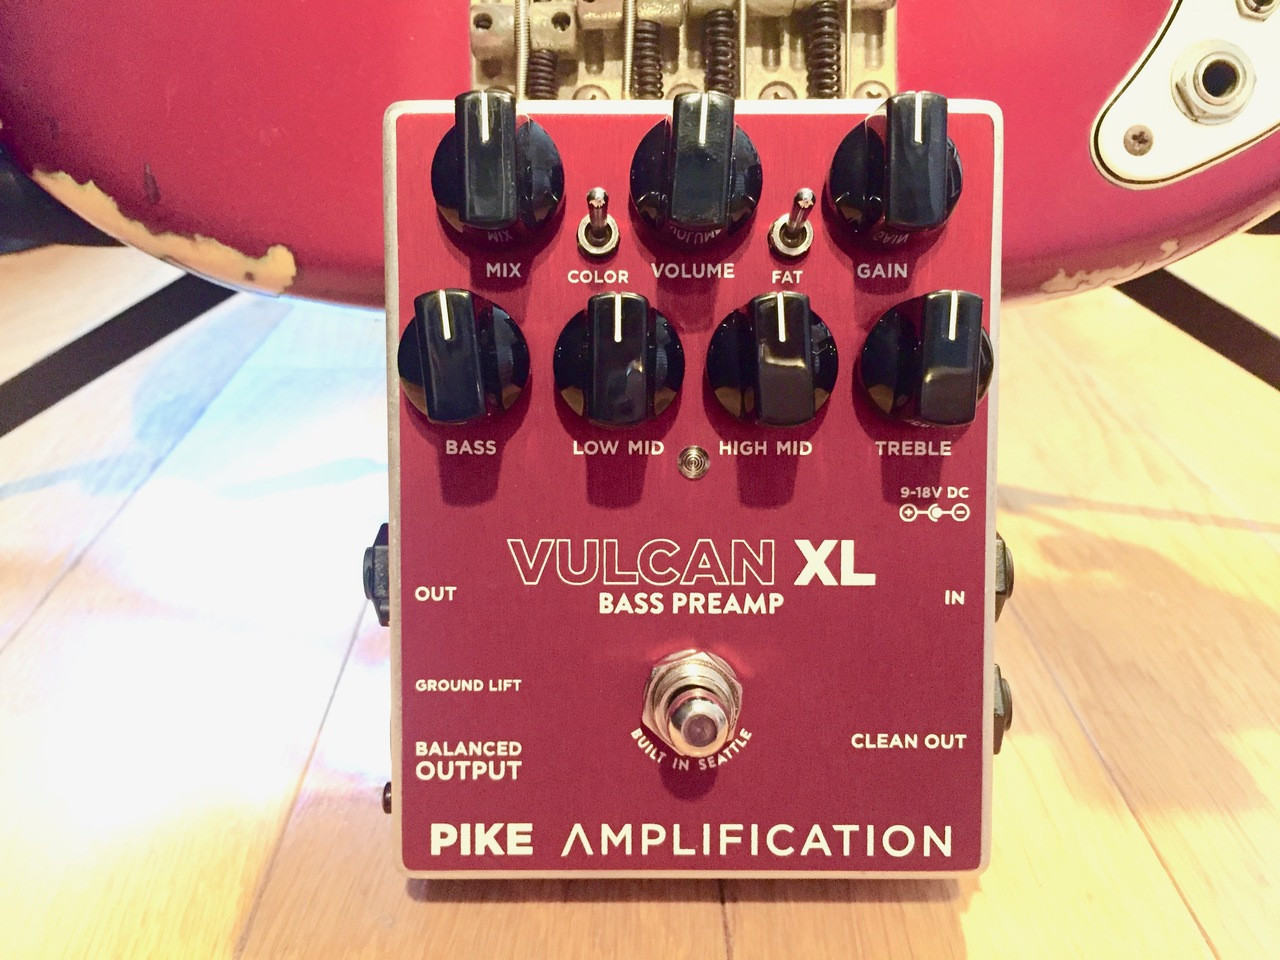 PIKE AMPLIFICATION VULCAN XL BASS PREAMP - Boutique Pedal NYC